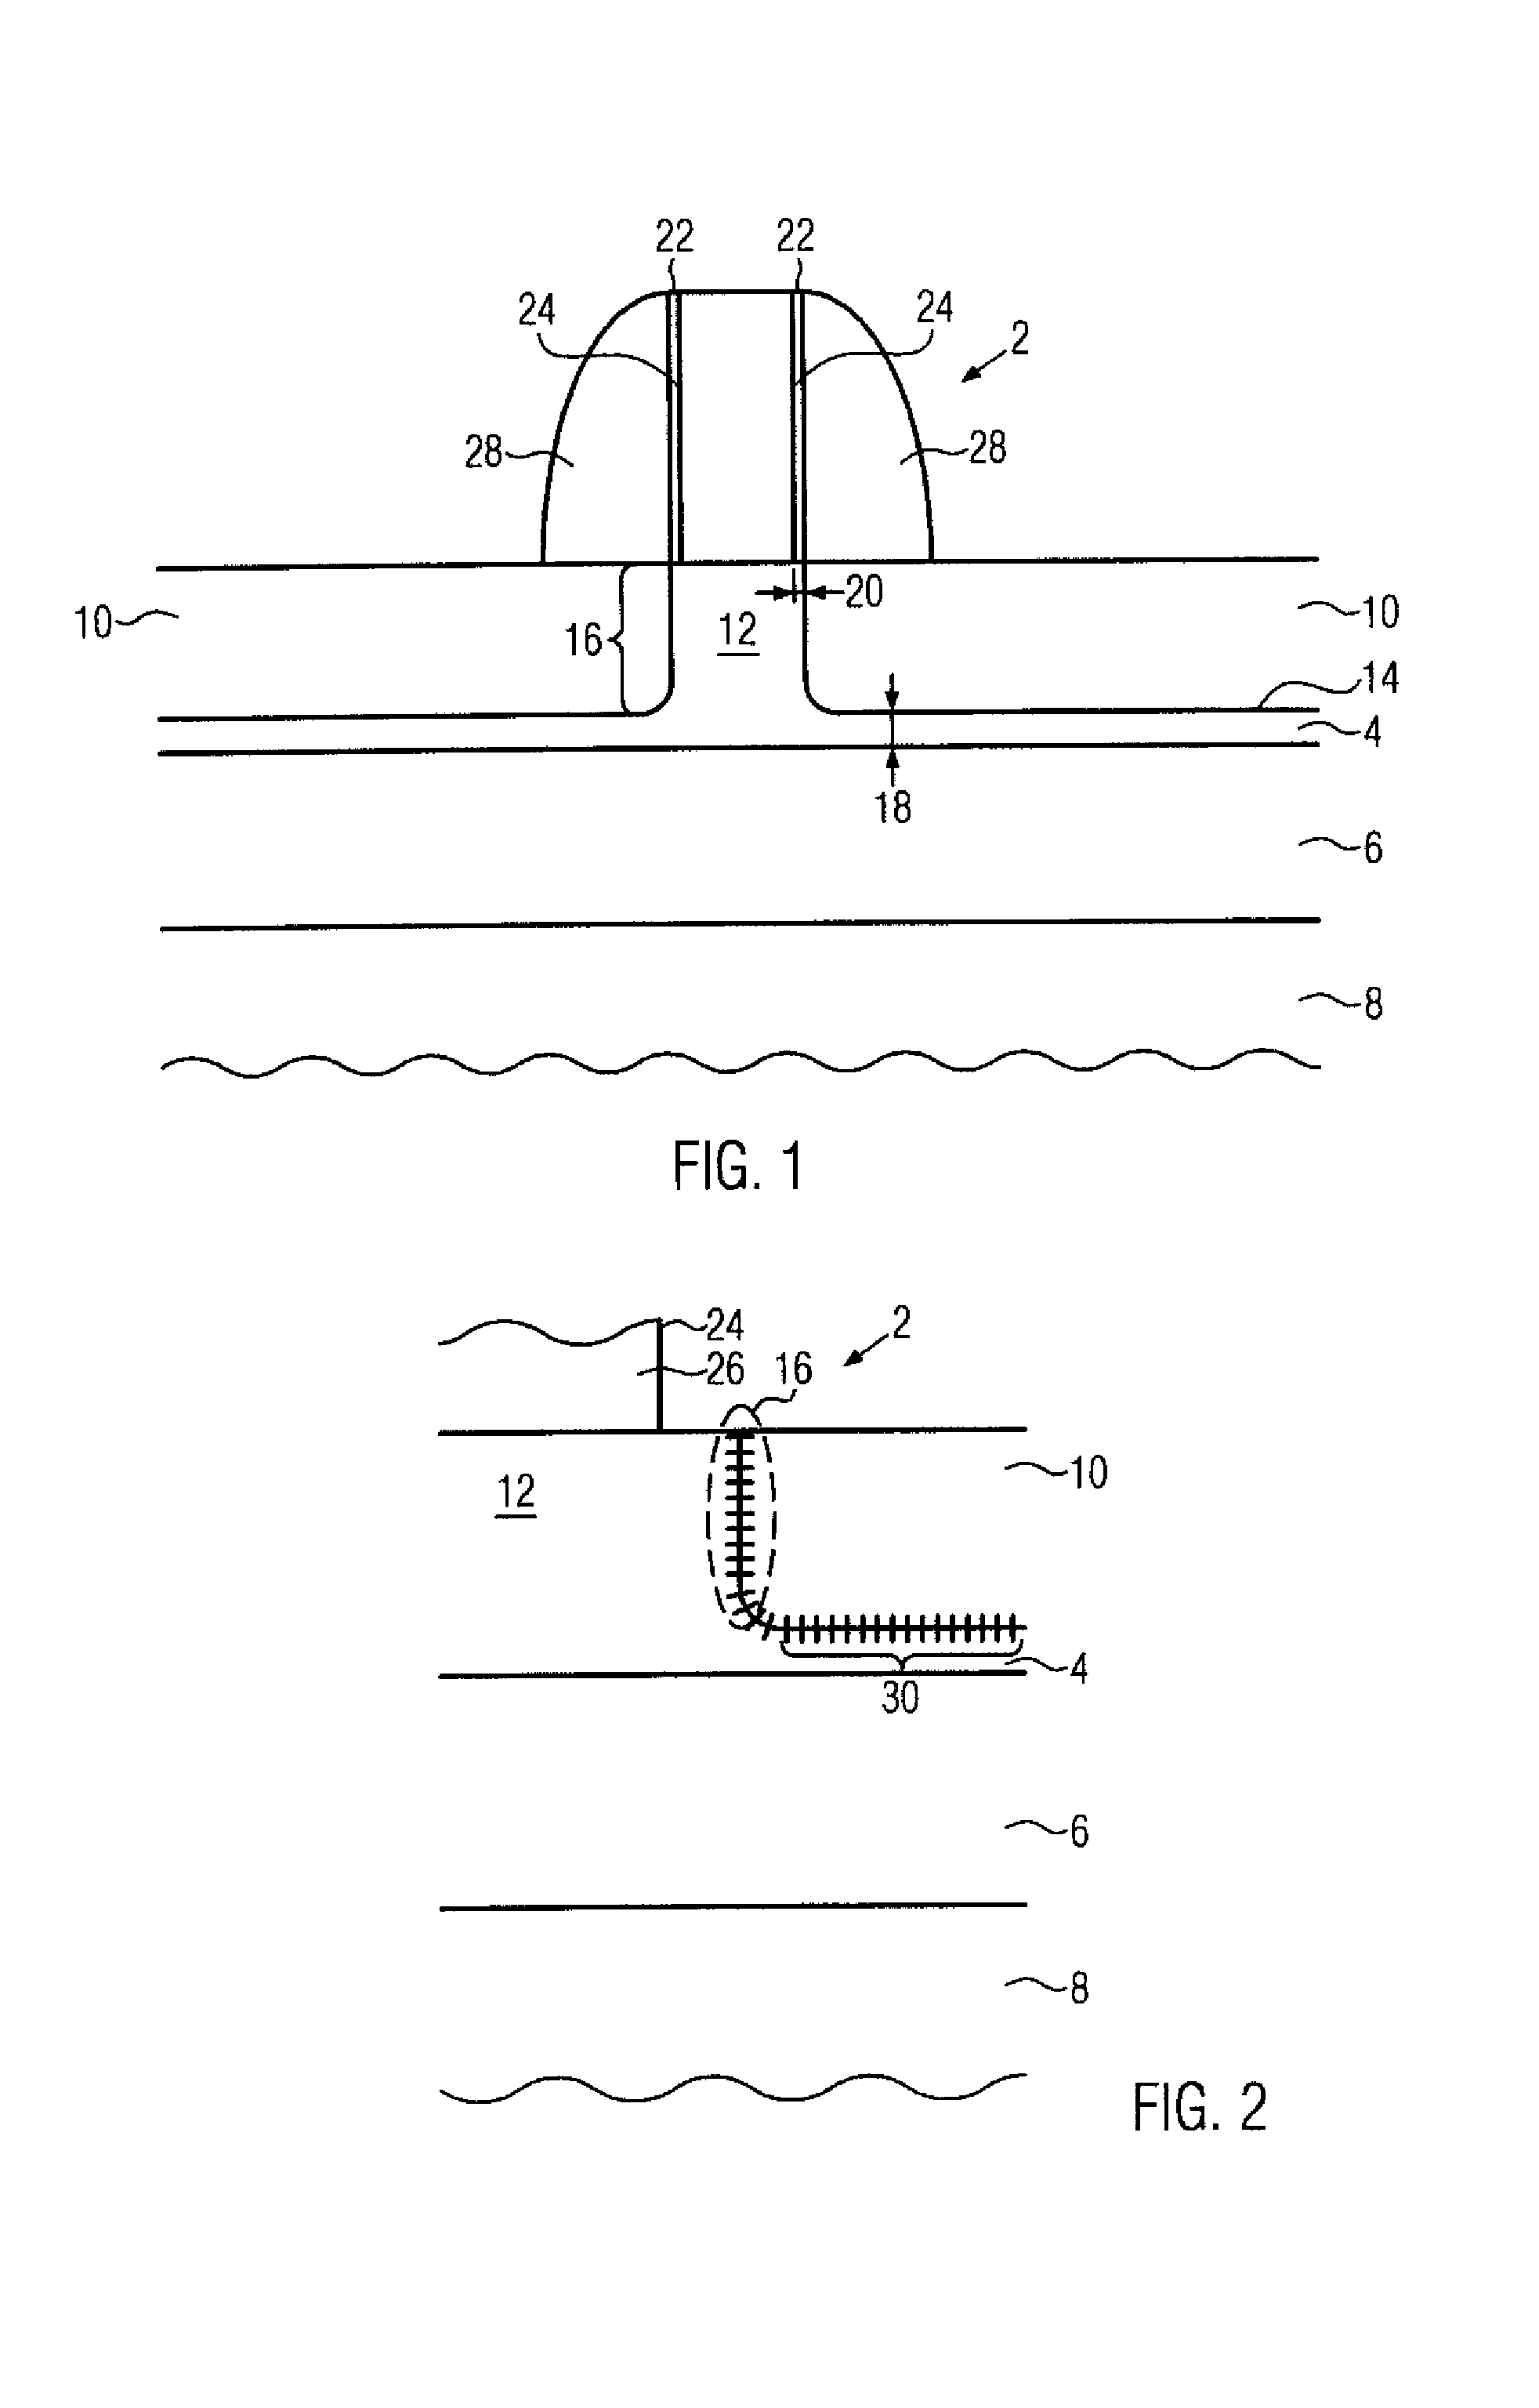 Transistor with embedded silicon/germanium material on a strained semiconductor on insulator substrate